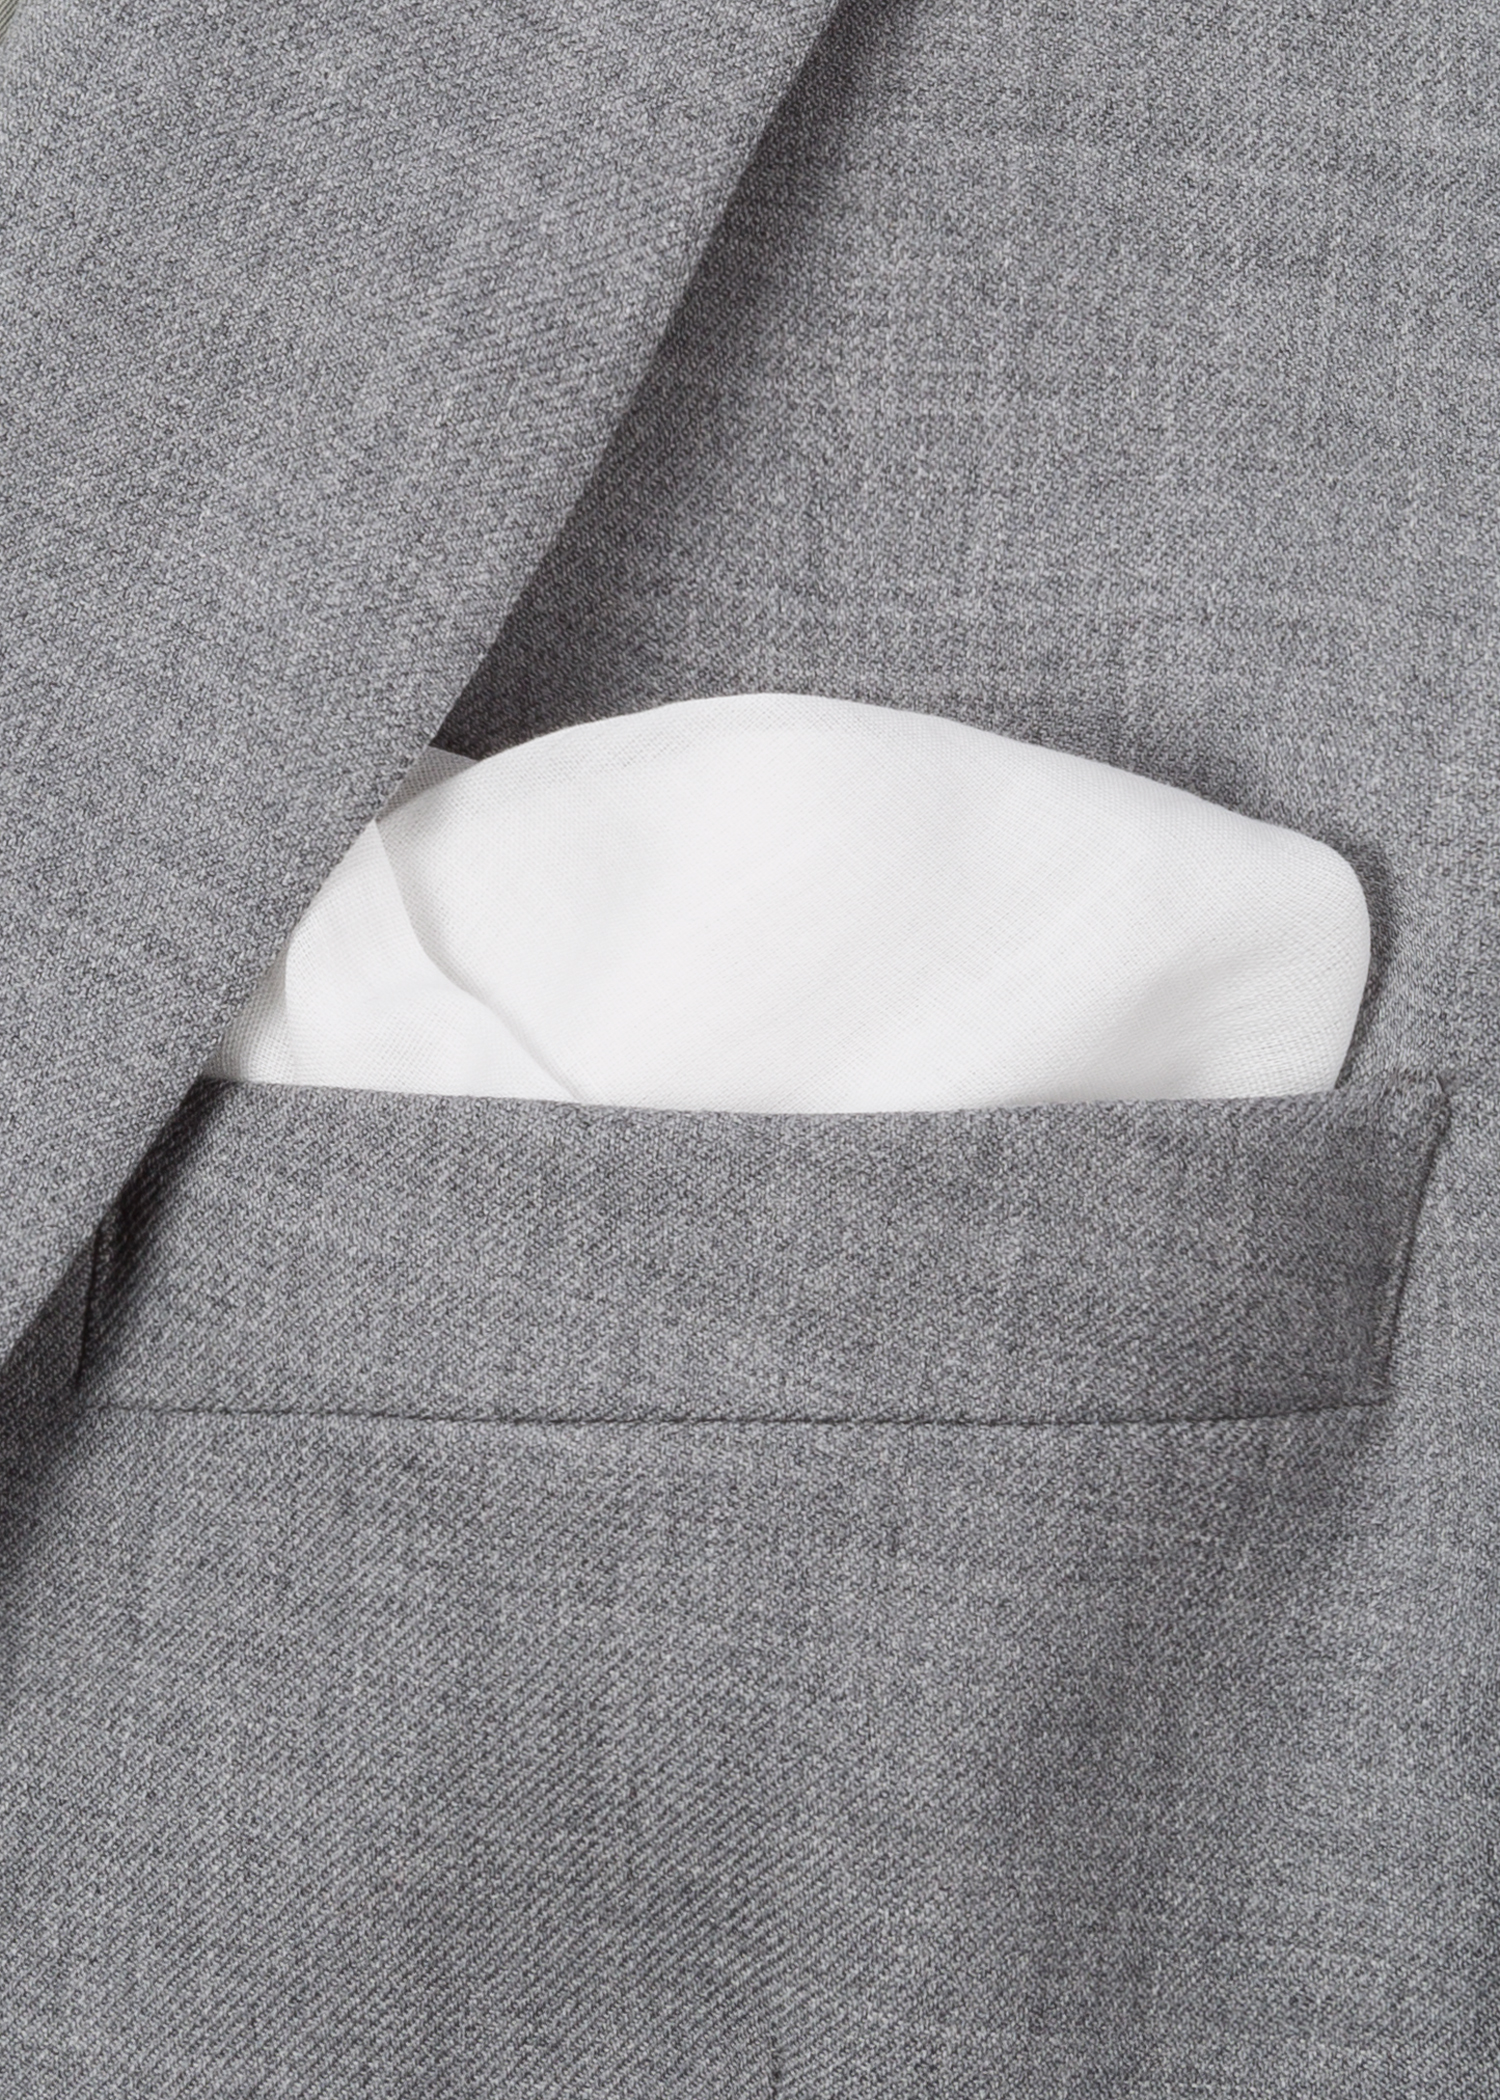 White Cotton Pocket Square With 